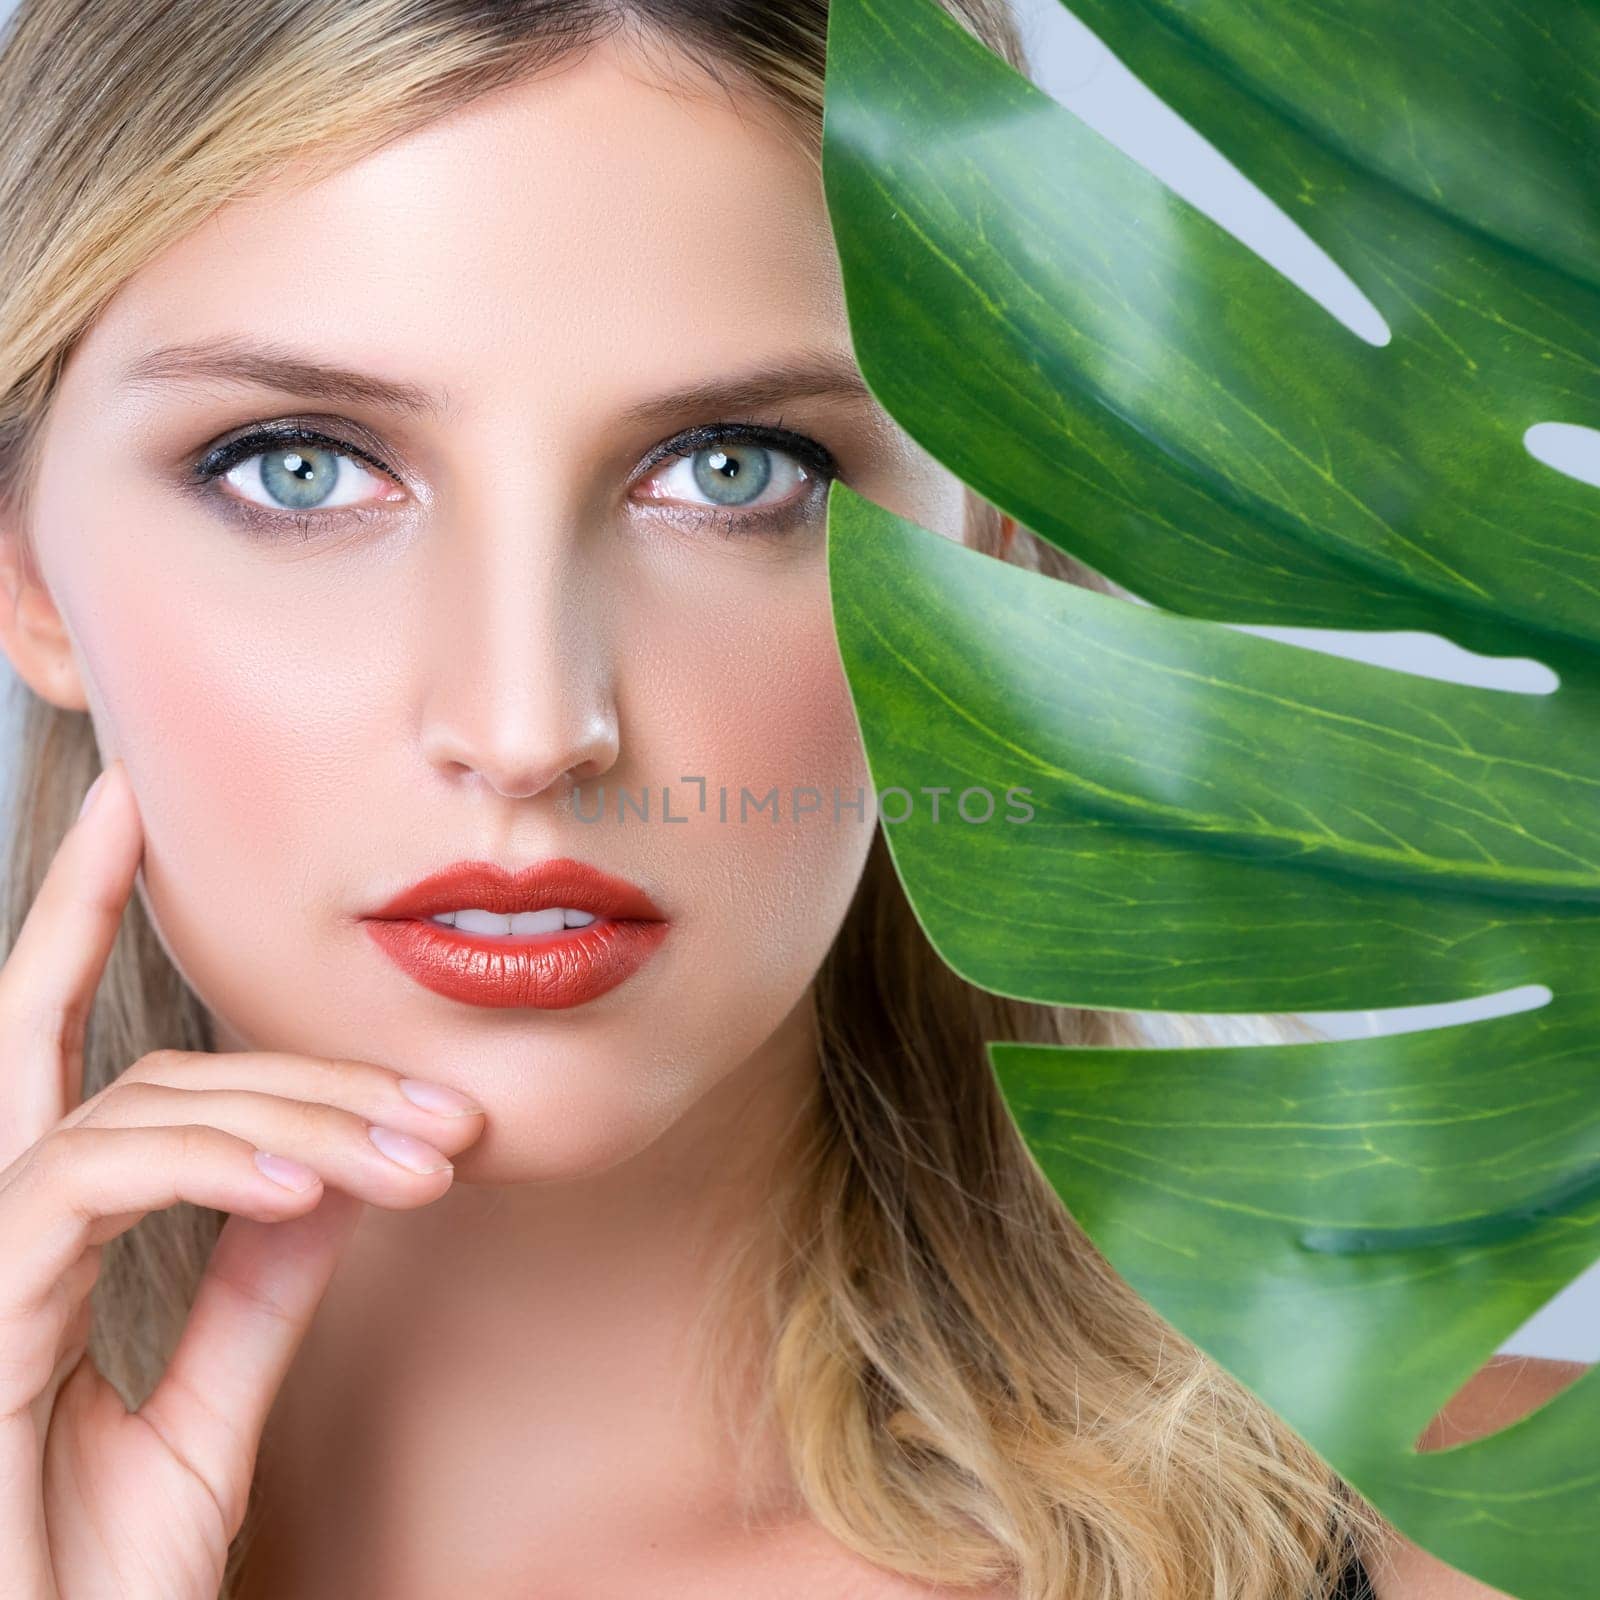 Closeup woman with perfect clean skin and alluring flawless natural soft facial makeup holding green leave monstera. Natural skincare treatment beauty or spa concept in isolated background.